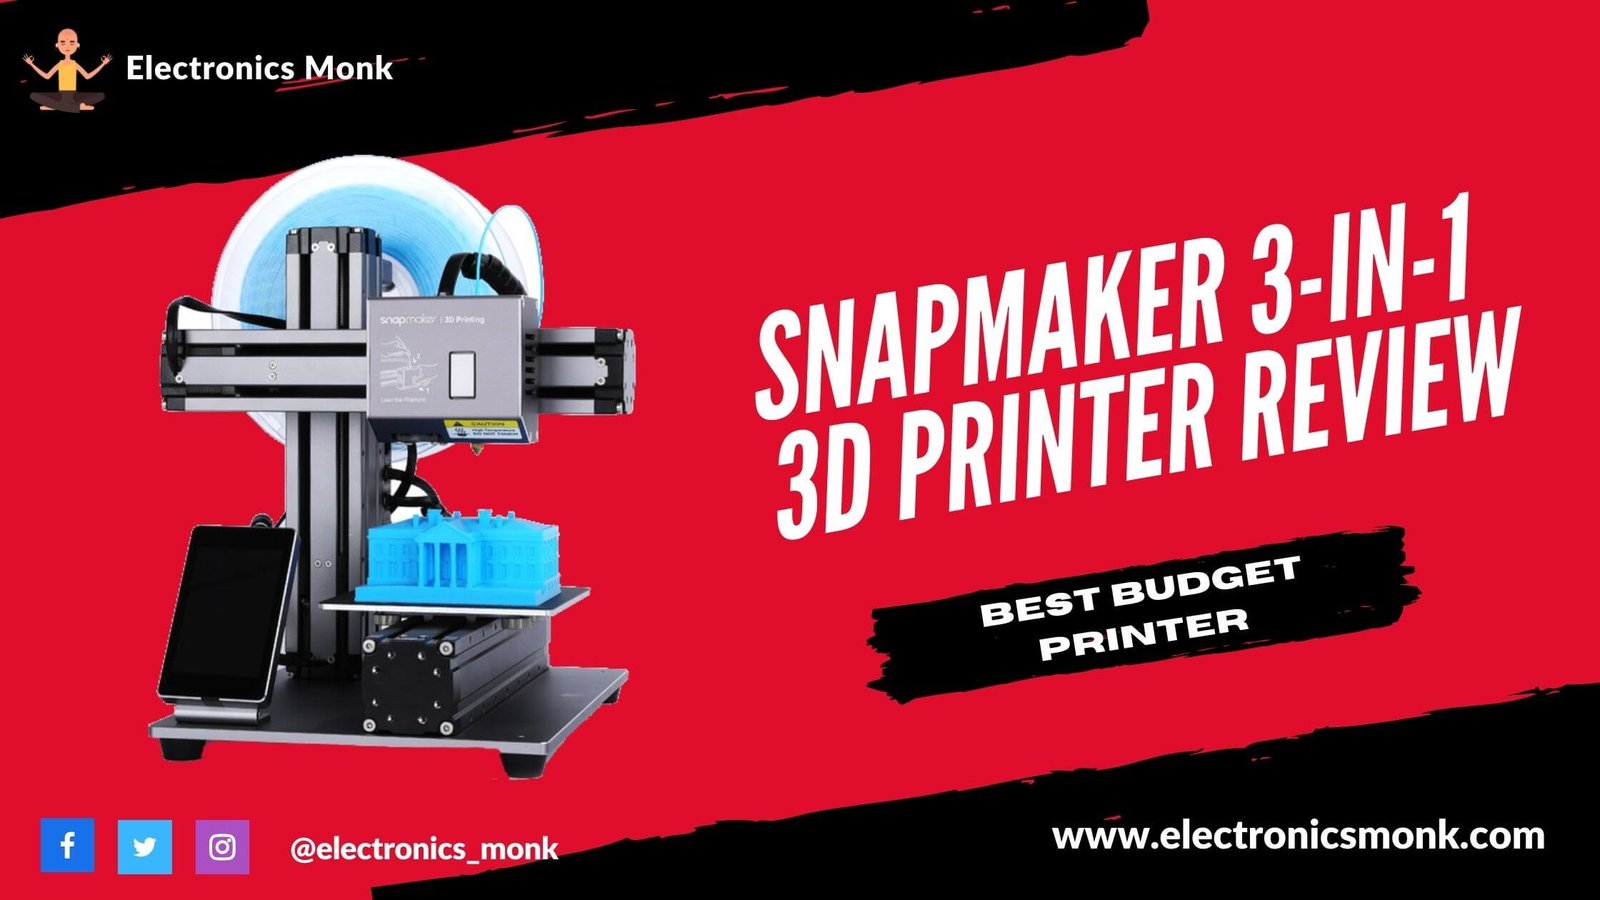 Snapmaker 3-in-1 3D Printer Review by Electronics Monk